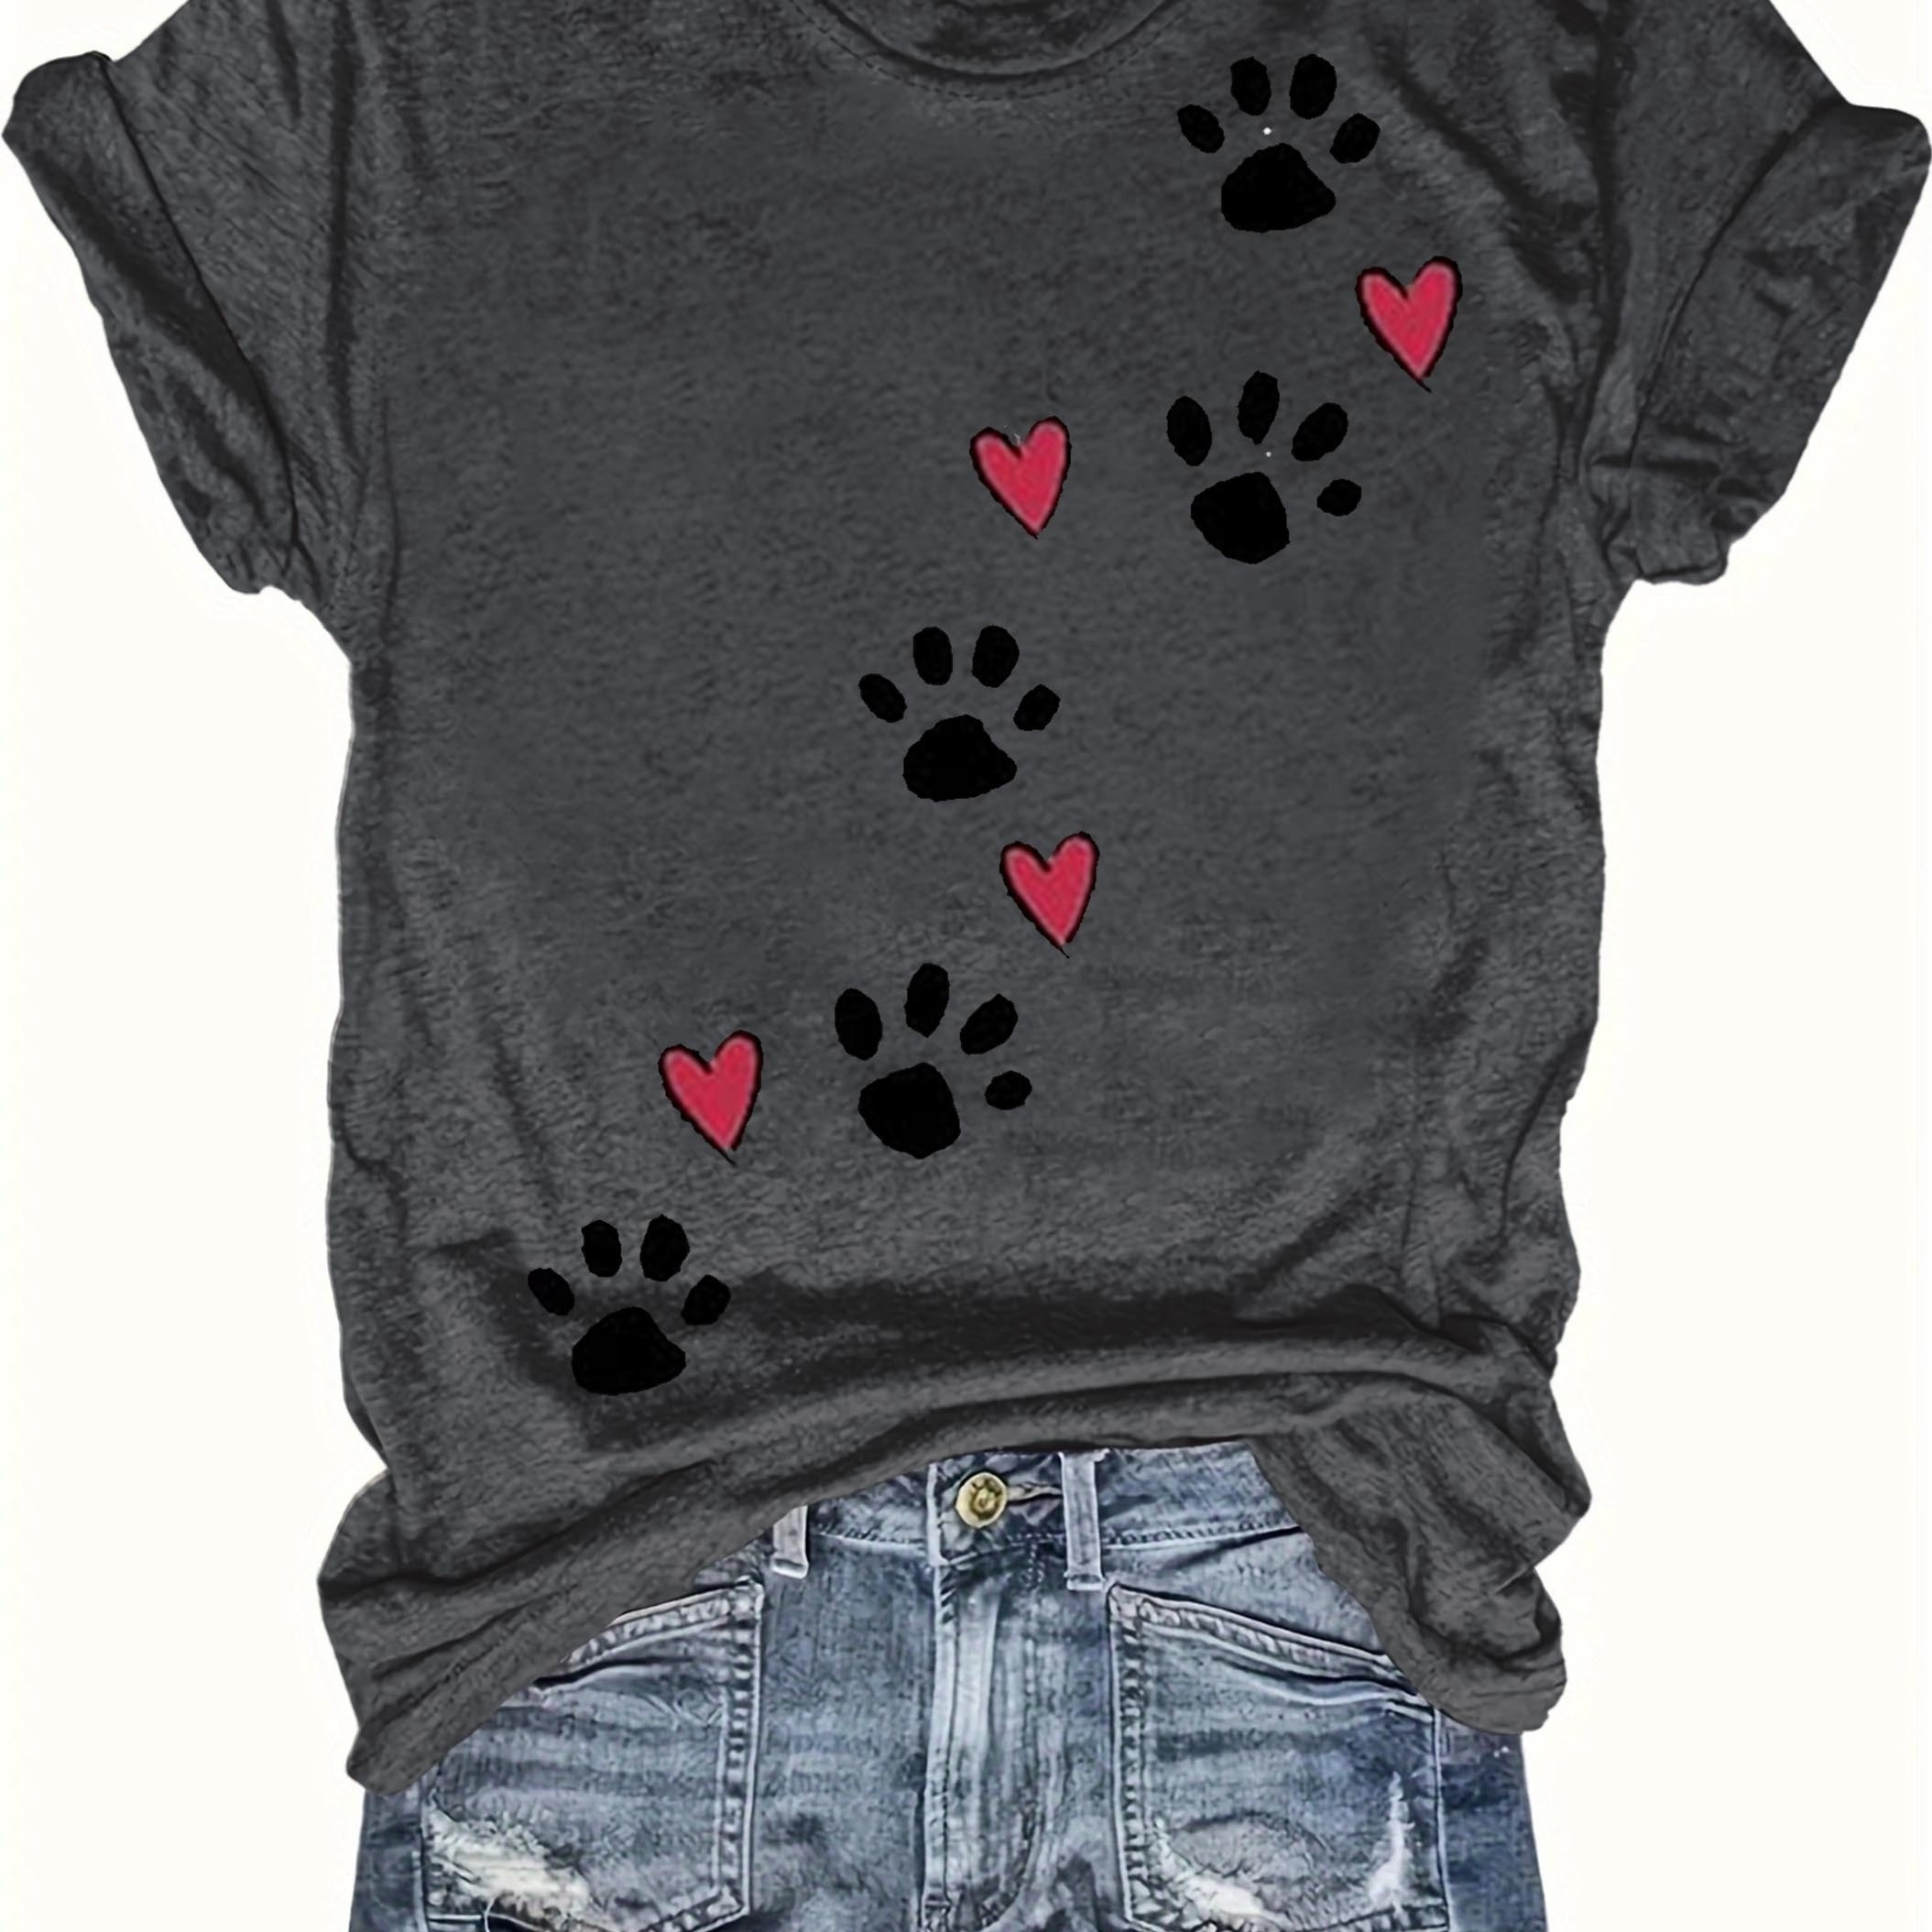 

Hearts & Paws Print Crew Neck T-shirt, Casual Short Sleeve T-shirt For Spring & Summer, Women's Clothing